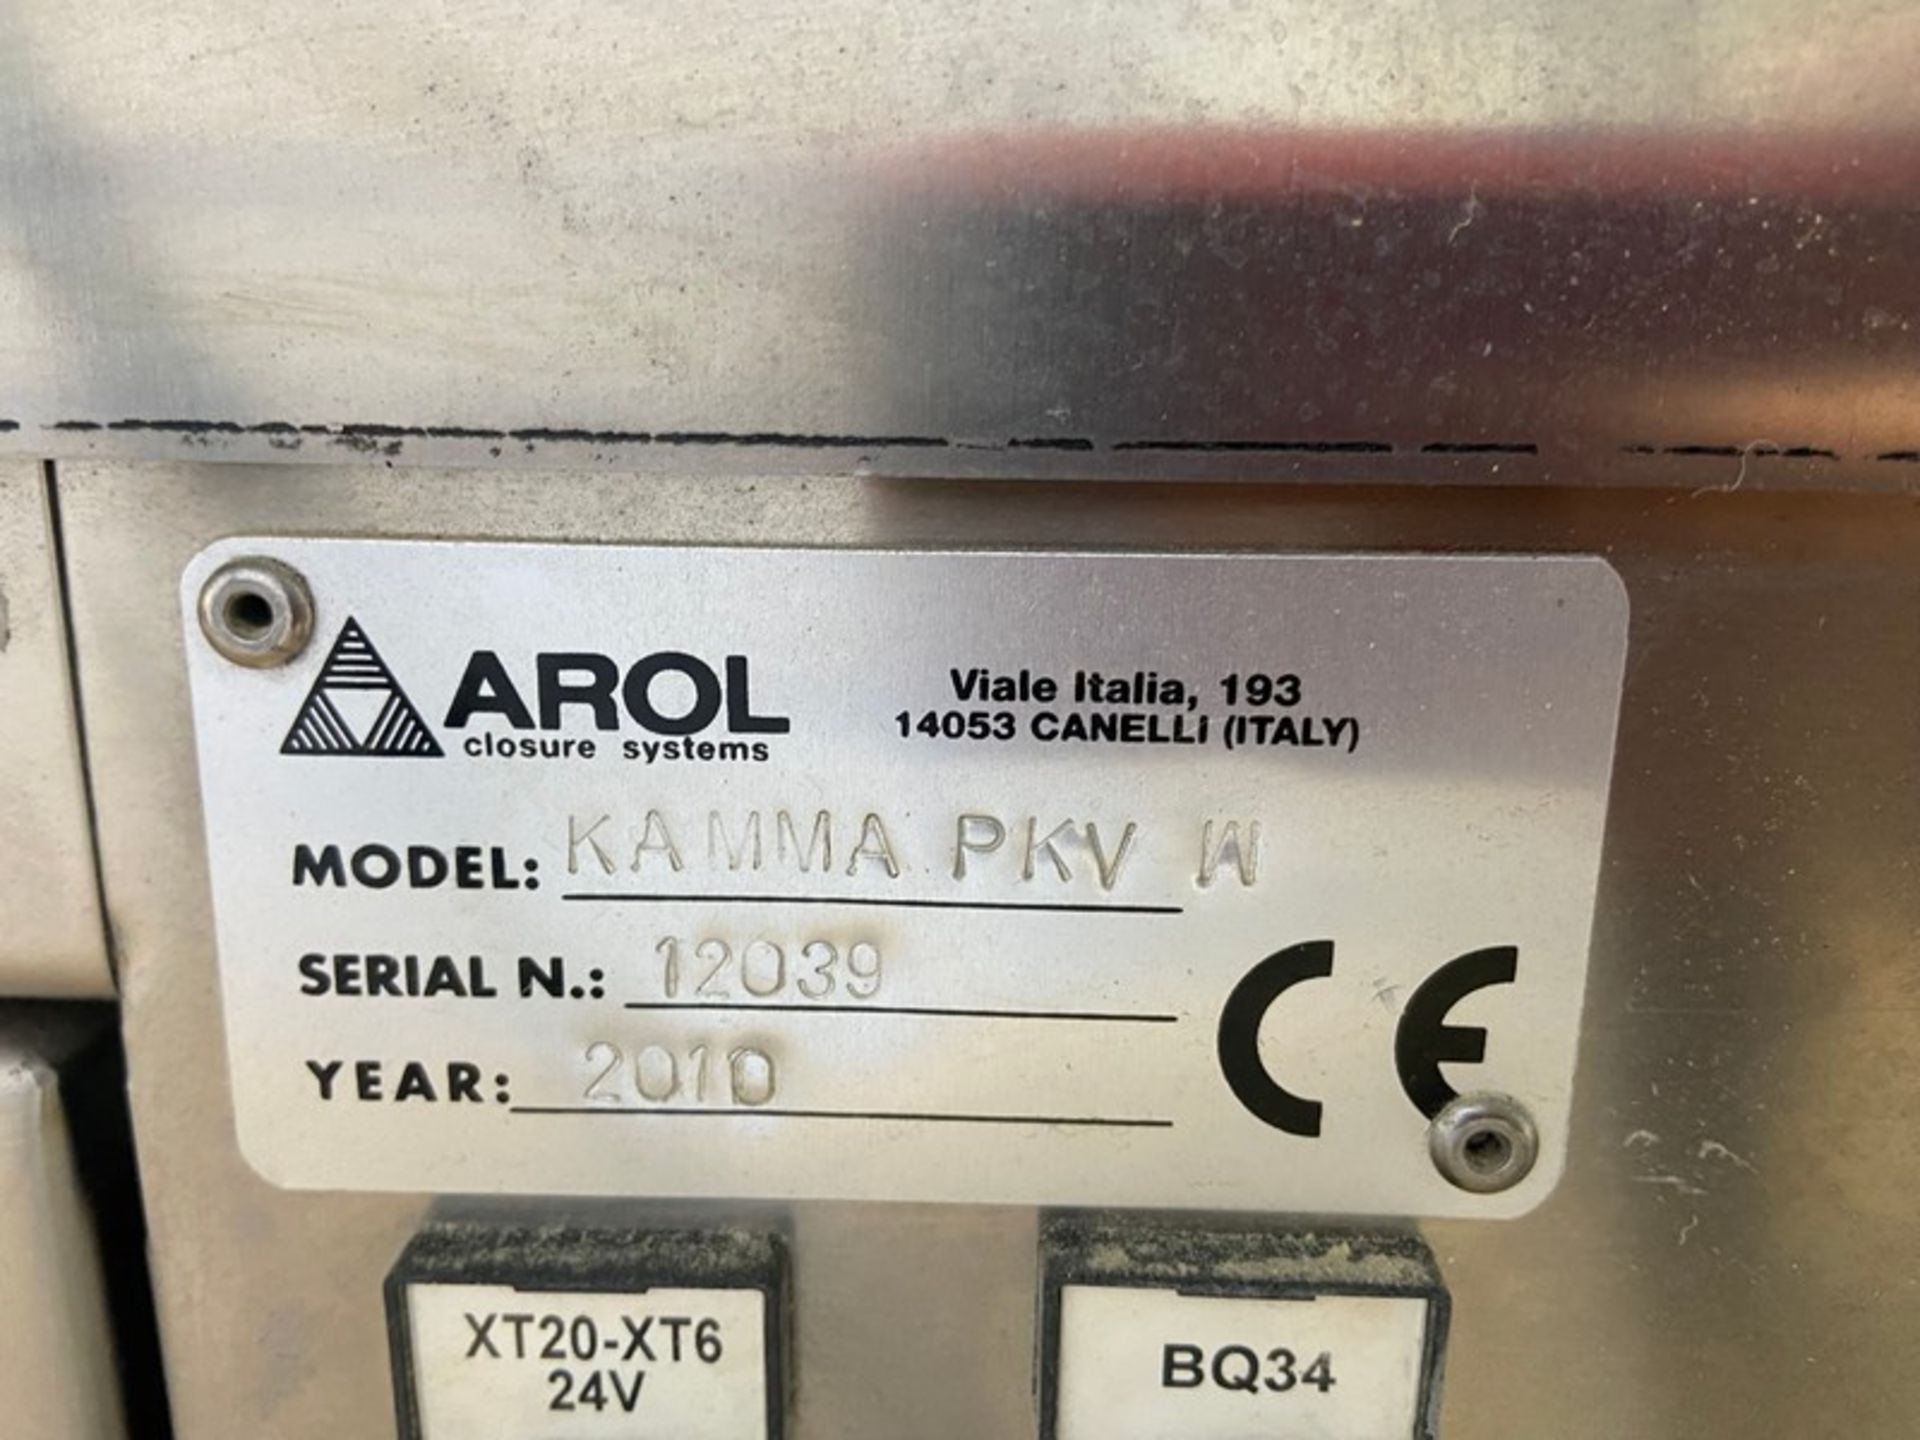 2010 AROL Closure Systems Lid Plugger, M/N KAMMA PKV W, S/N 12039, with Allen-Bradley PLC & - Image 13 of 23